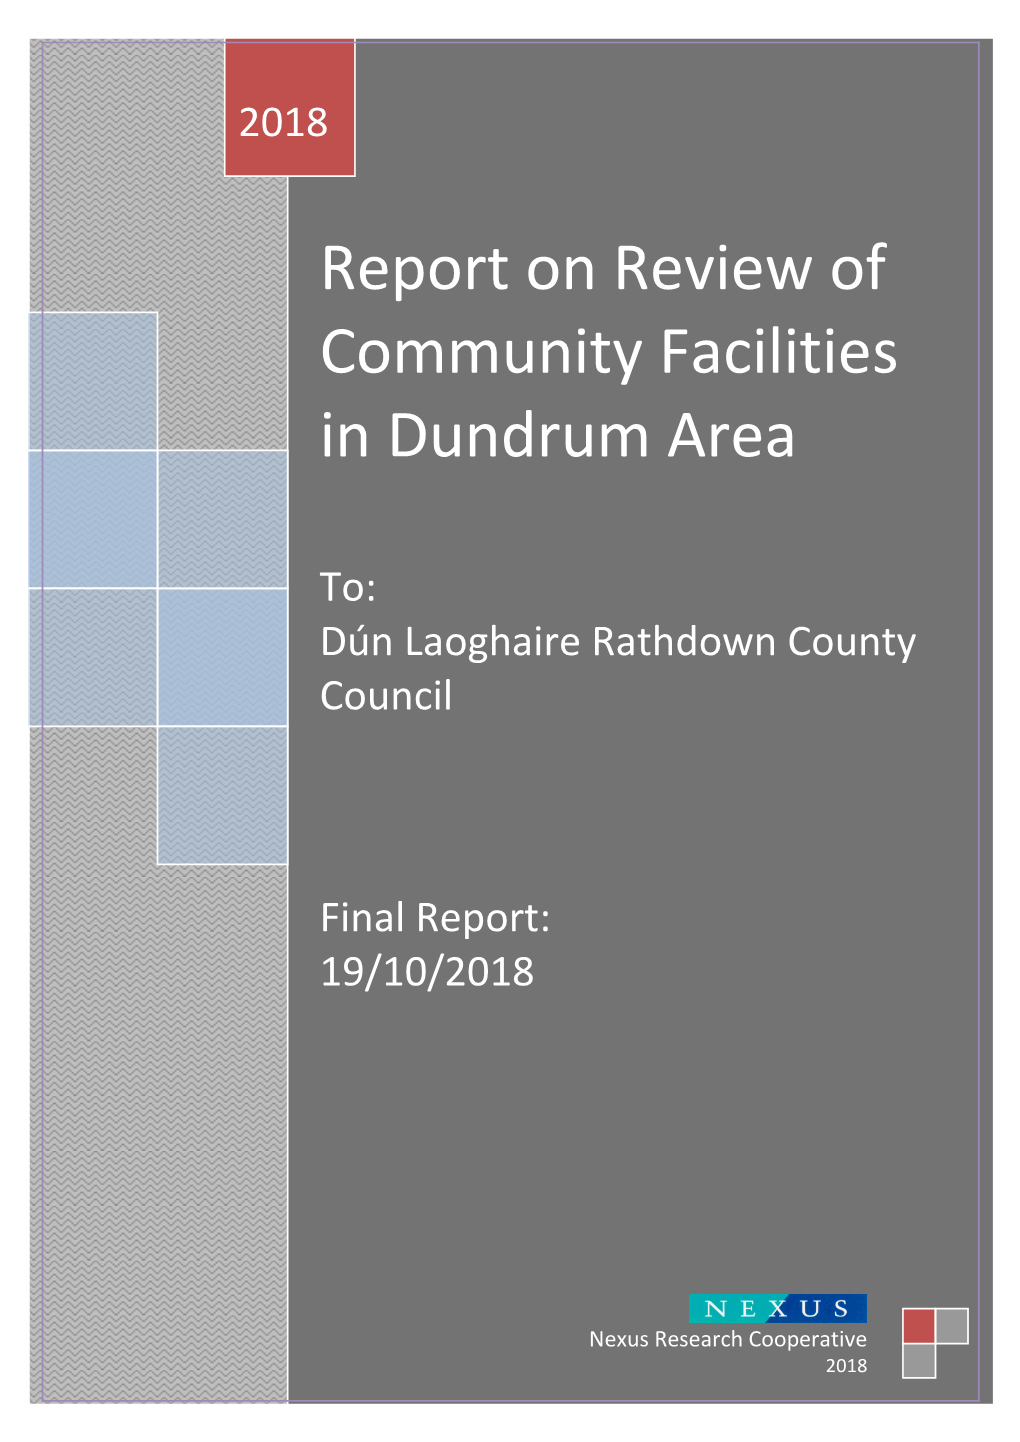 Report on Review of Community Facilities in Dundrum Area